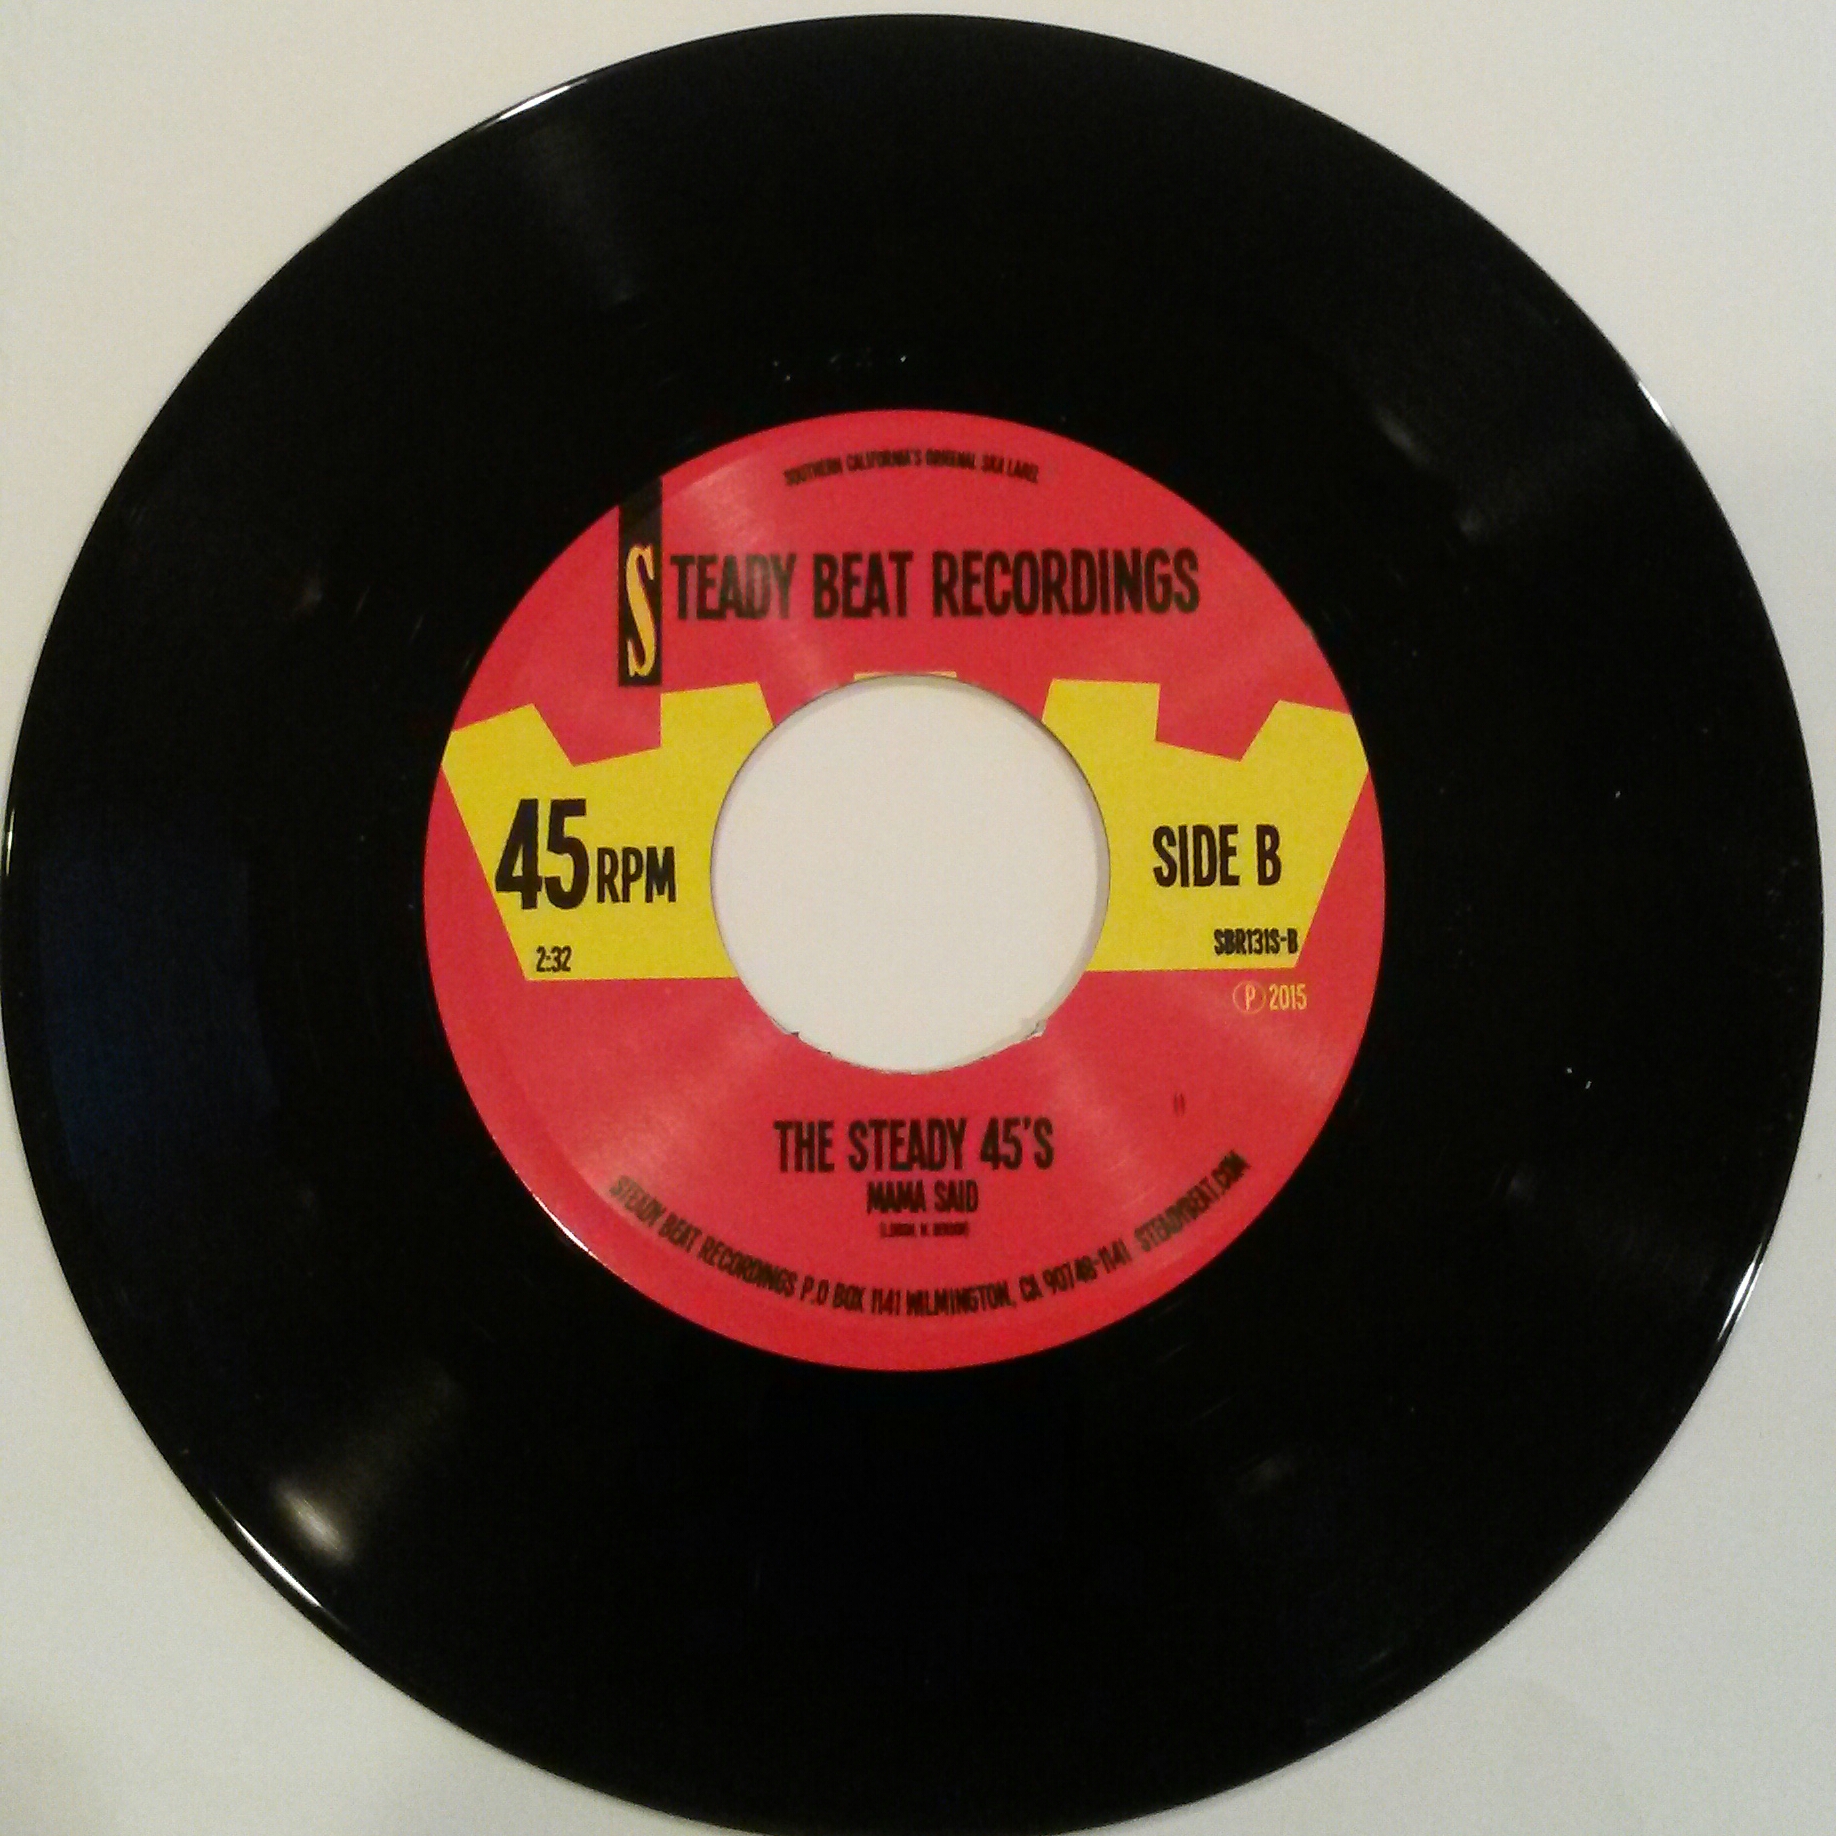 SB131  The Steady 45's  Trouble in Paradise / Mama Said 7" vinyl